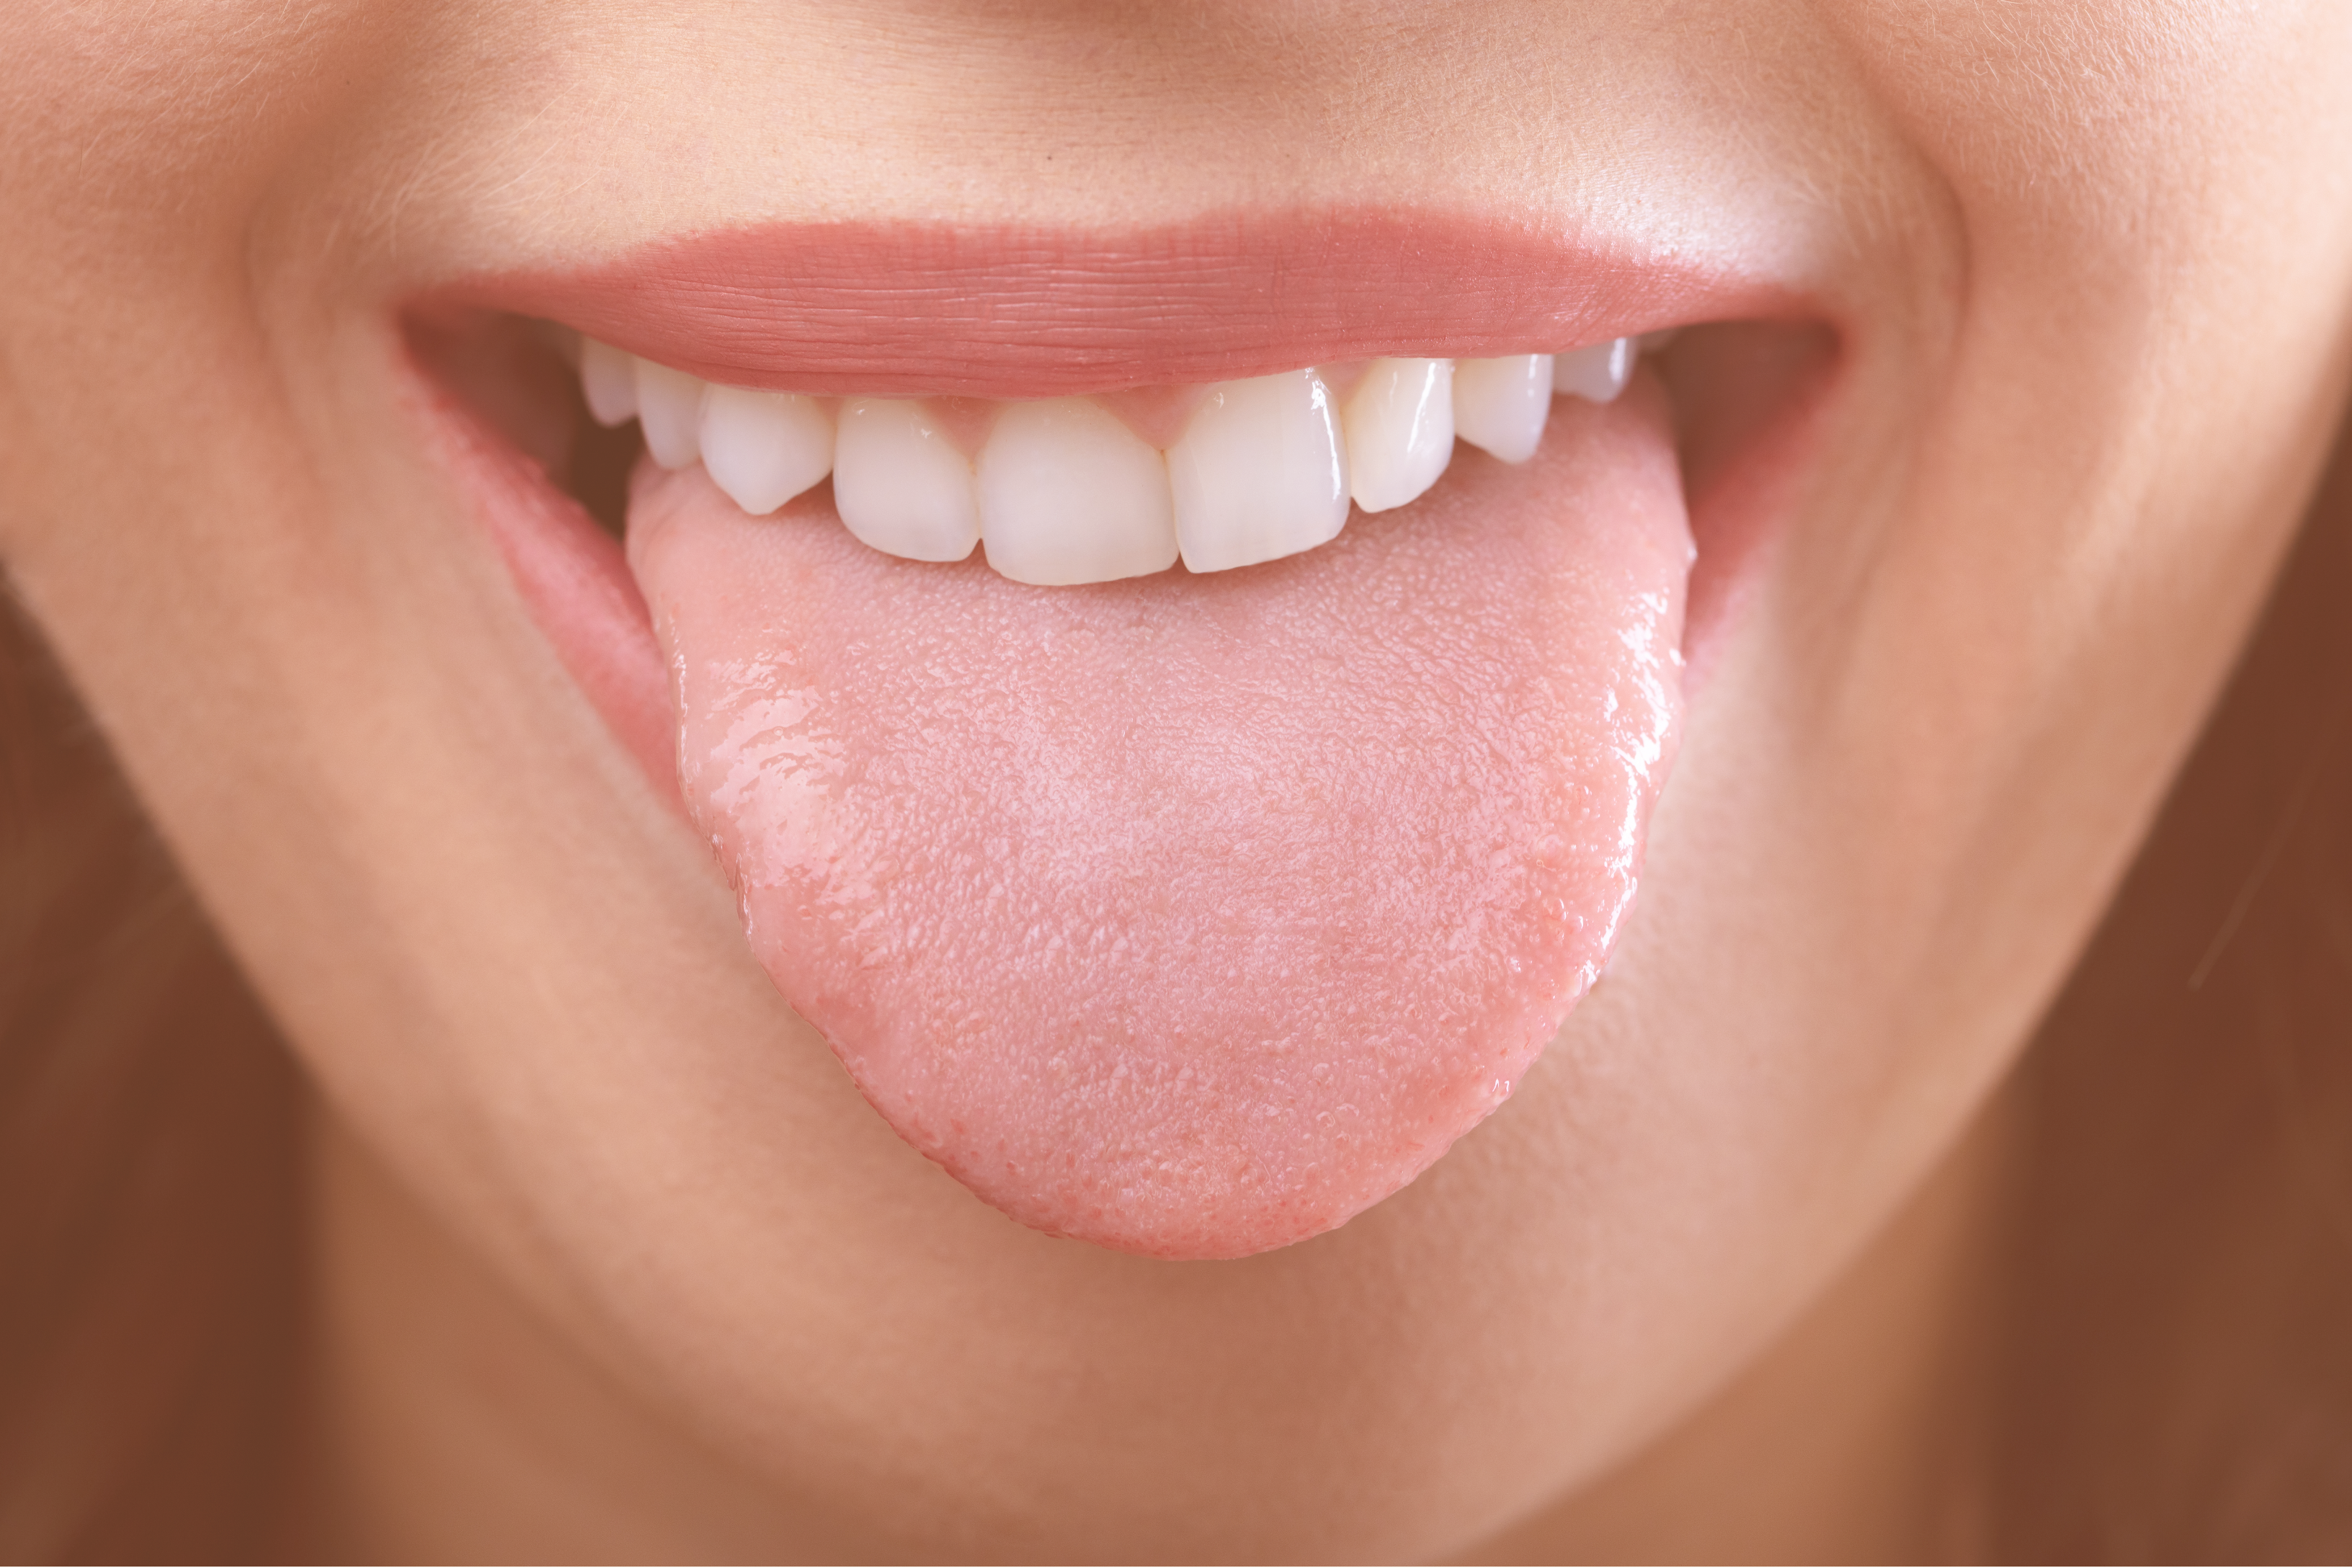 GSD-Scalloped-Tongue-Causes-and-Treatment-Blog-01.27.2210.21.21%20%281%29.png